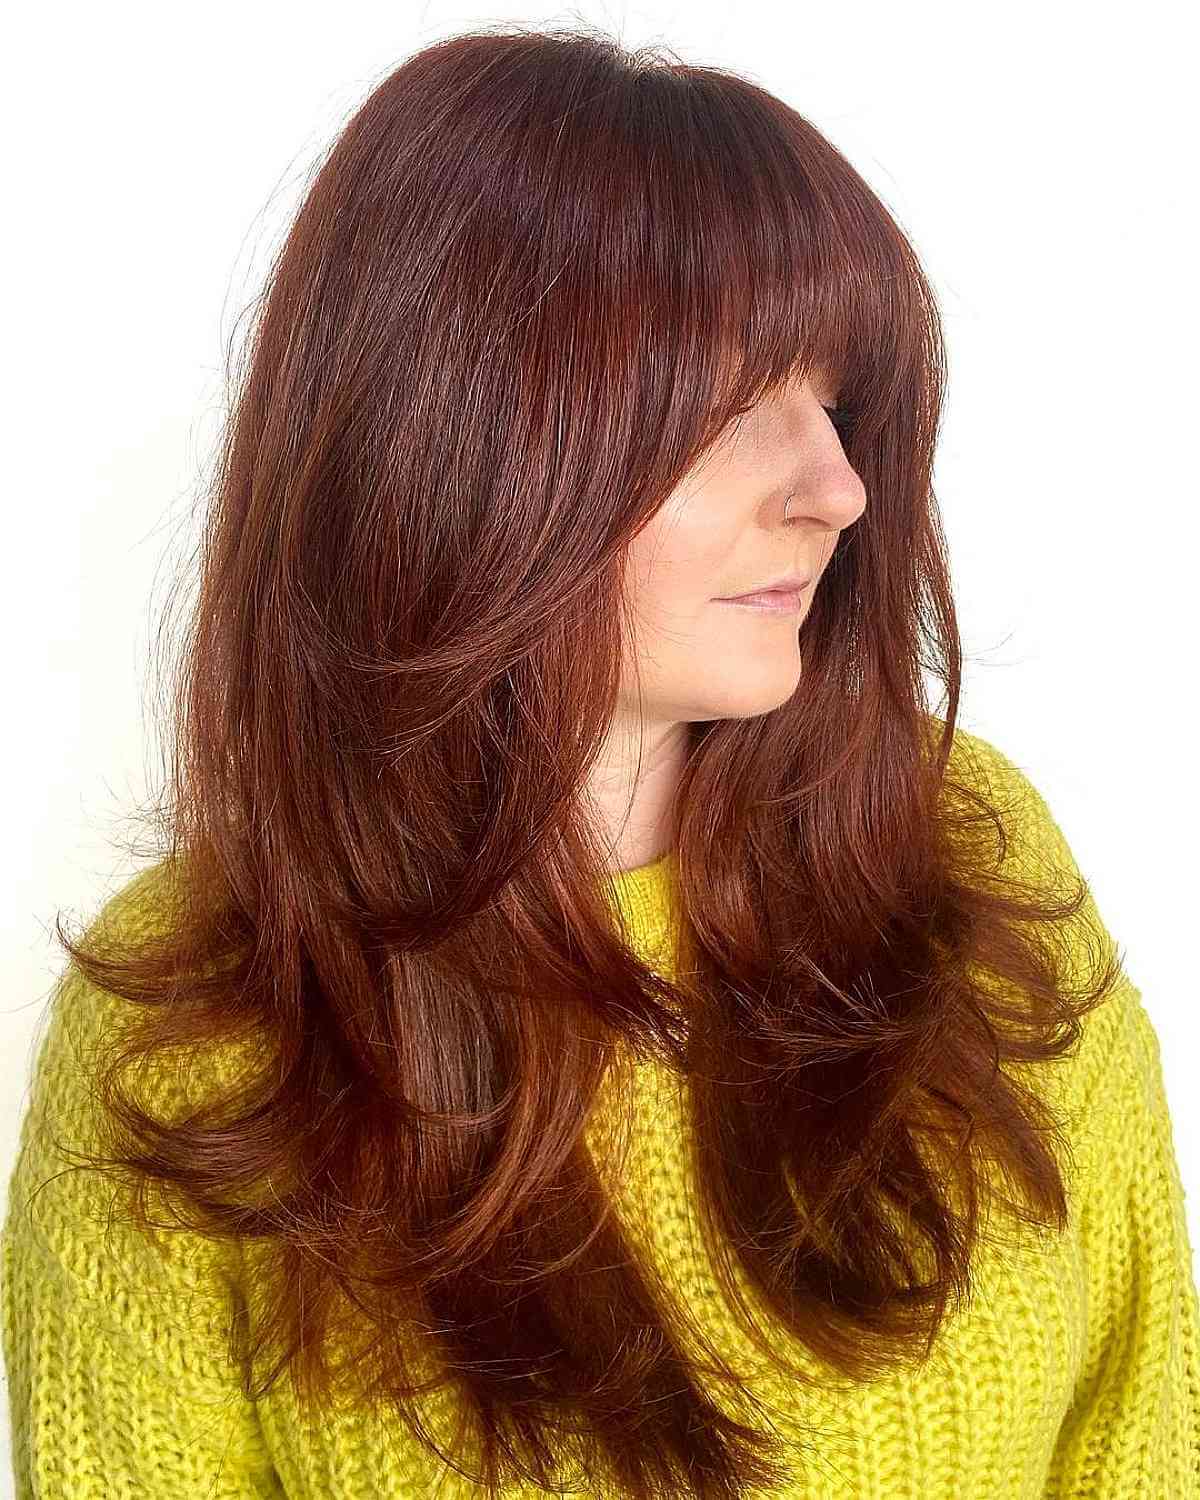 Long Blowout Style on a Layered Cut with Bangs for a 40-year-old lady